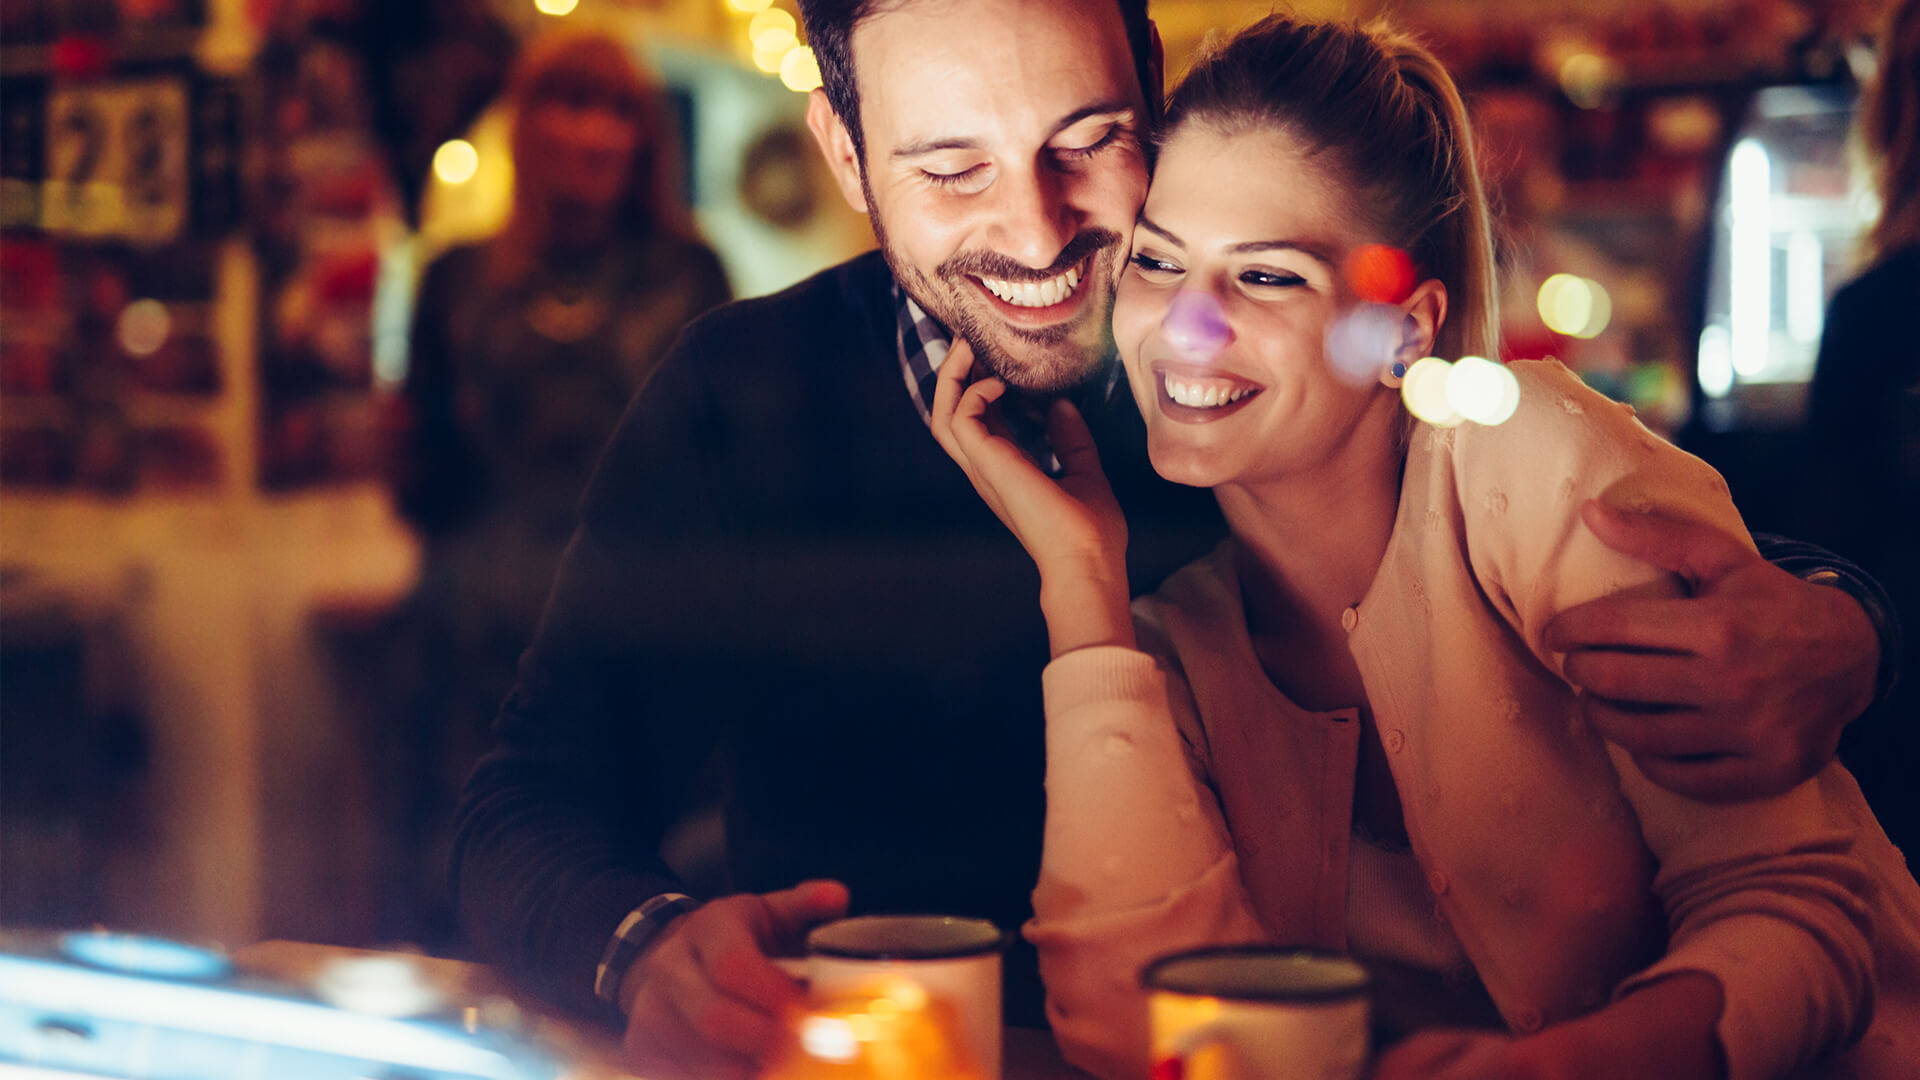 How to Organise a Sophisticated Date Night for Your Significant